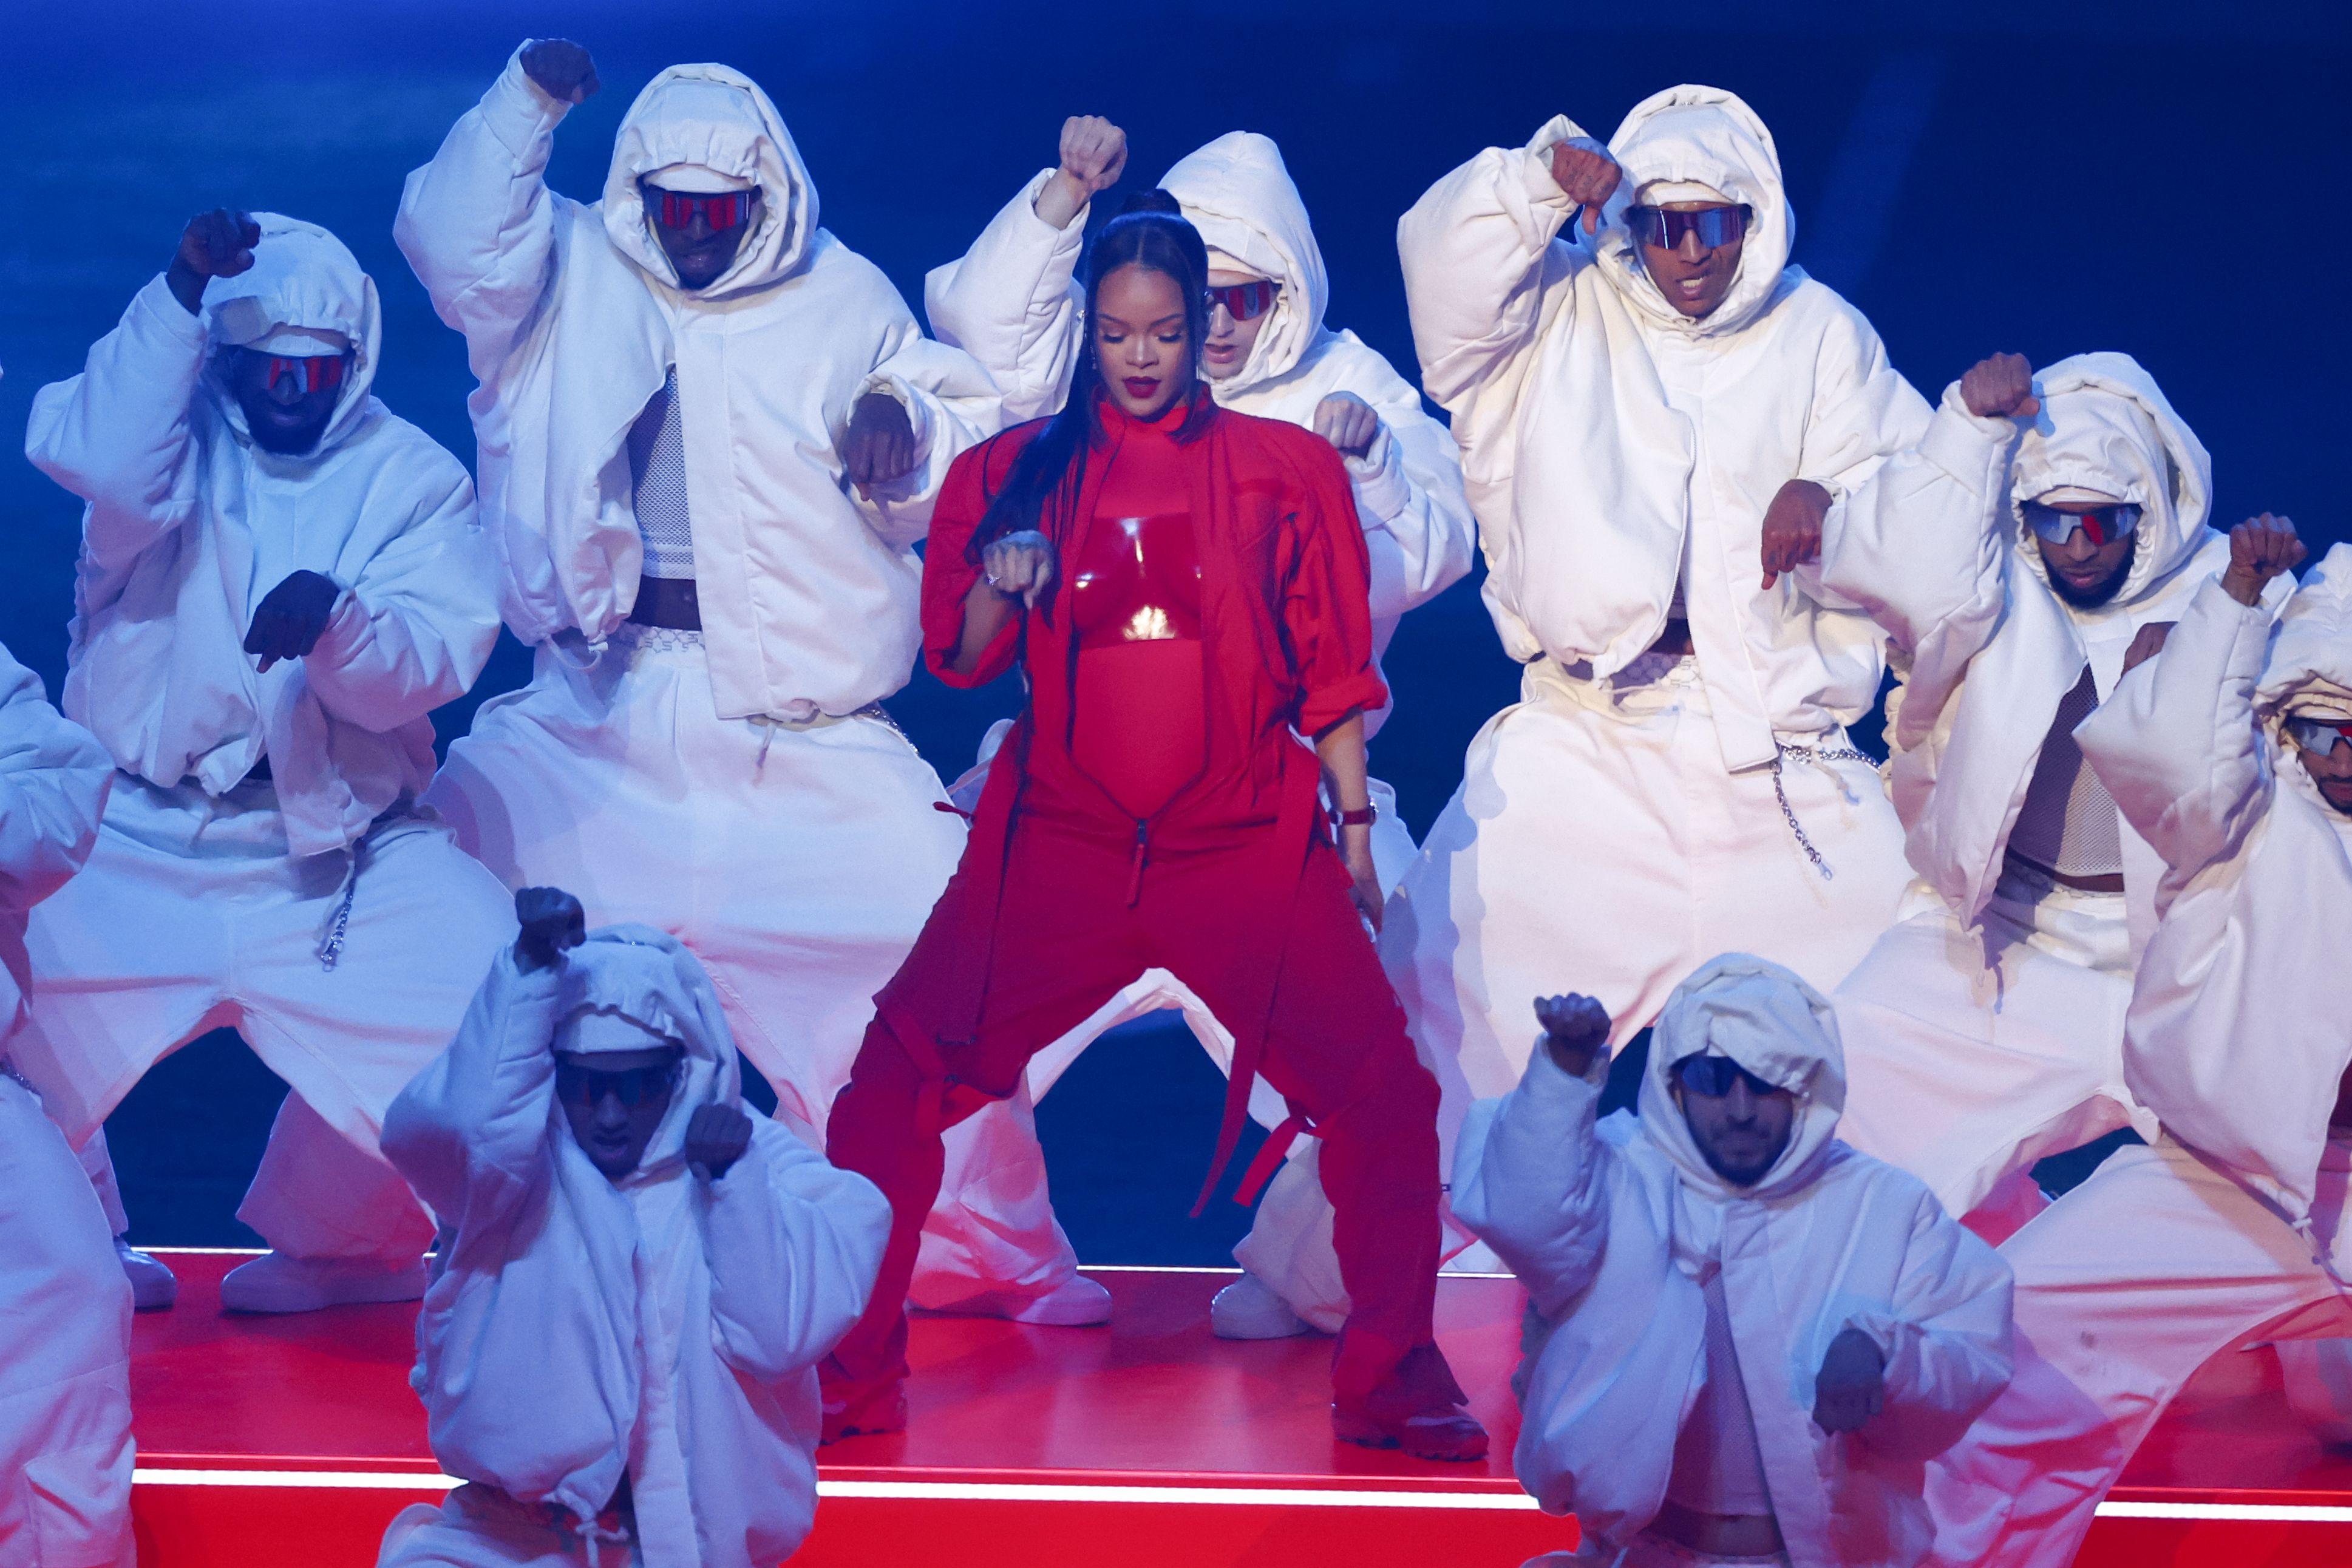 How Rihanna made a style statement at the Super Bowl - Offaly Live